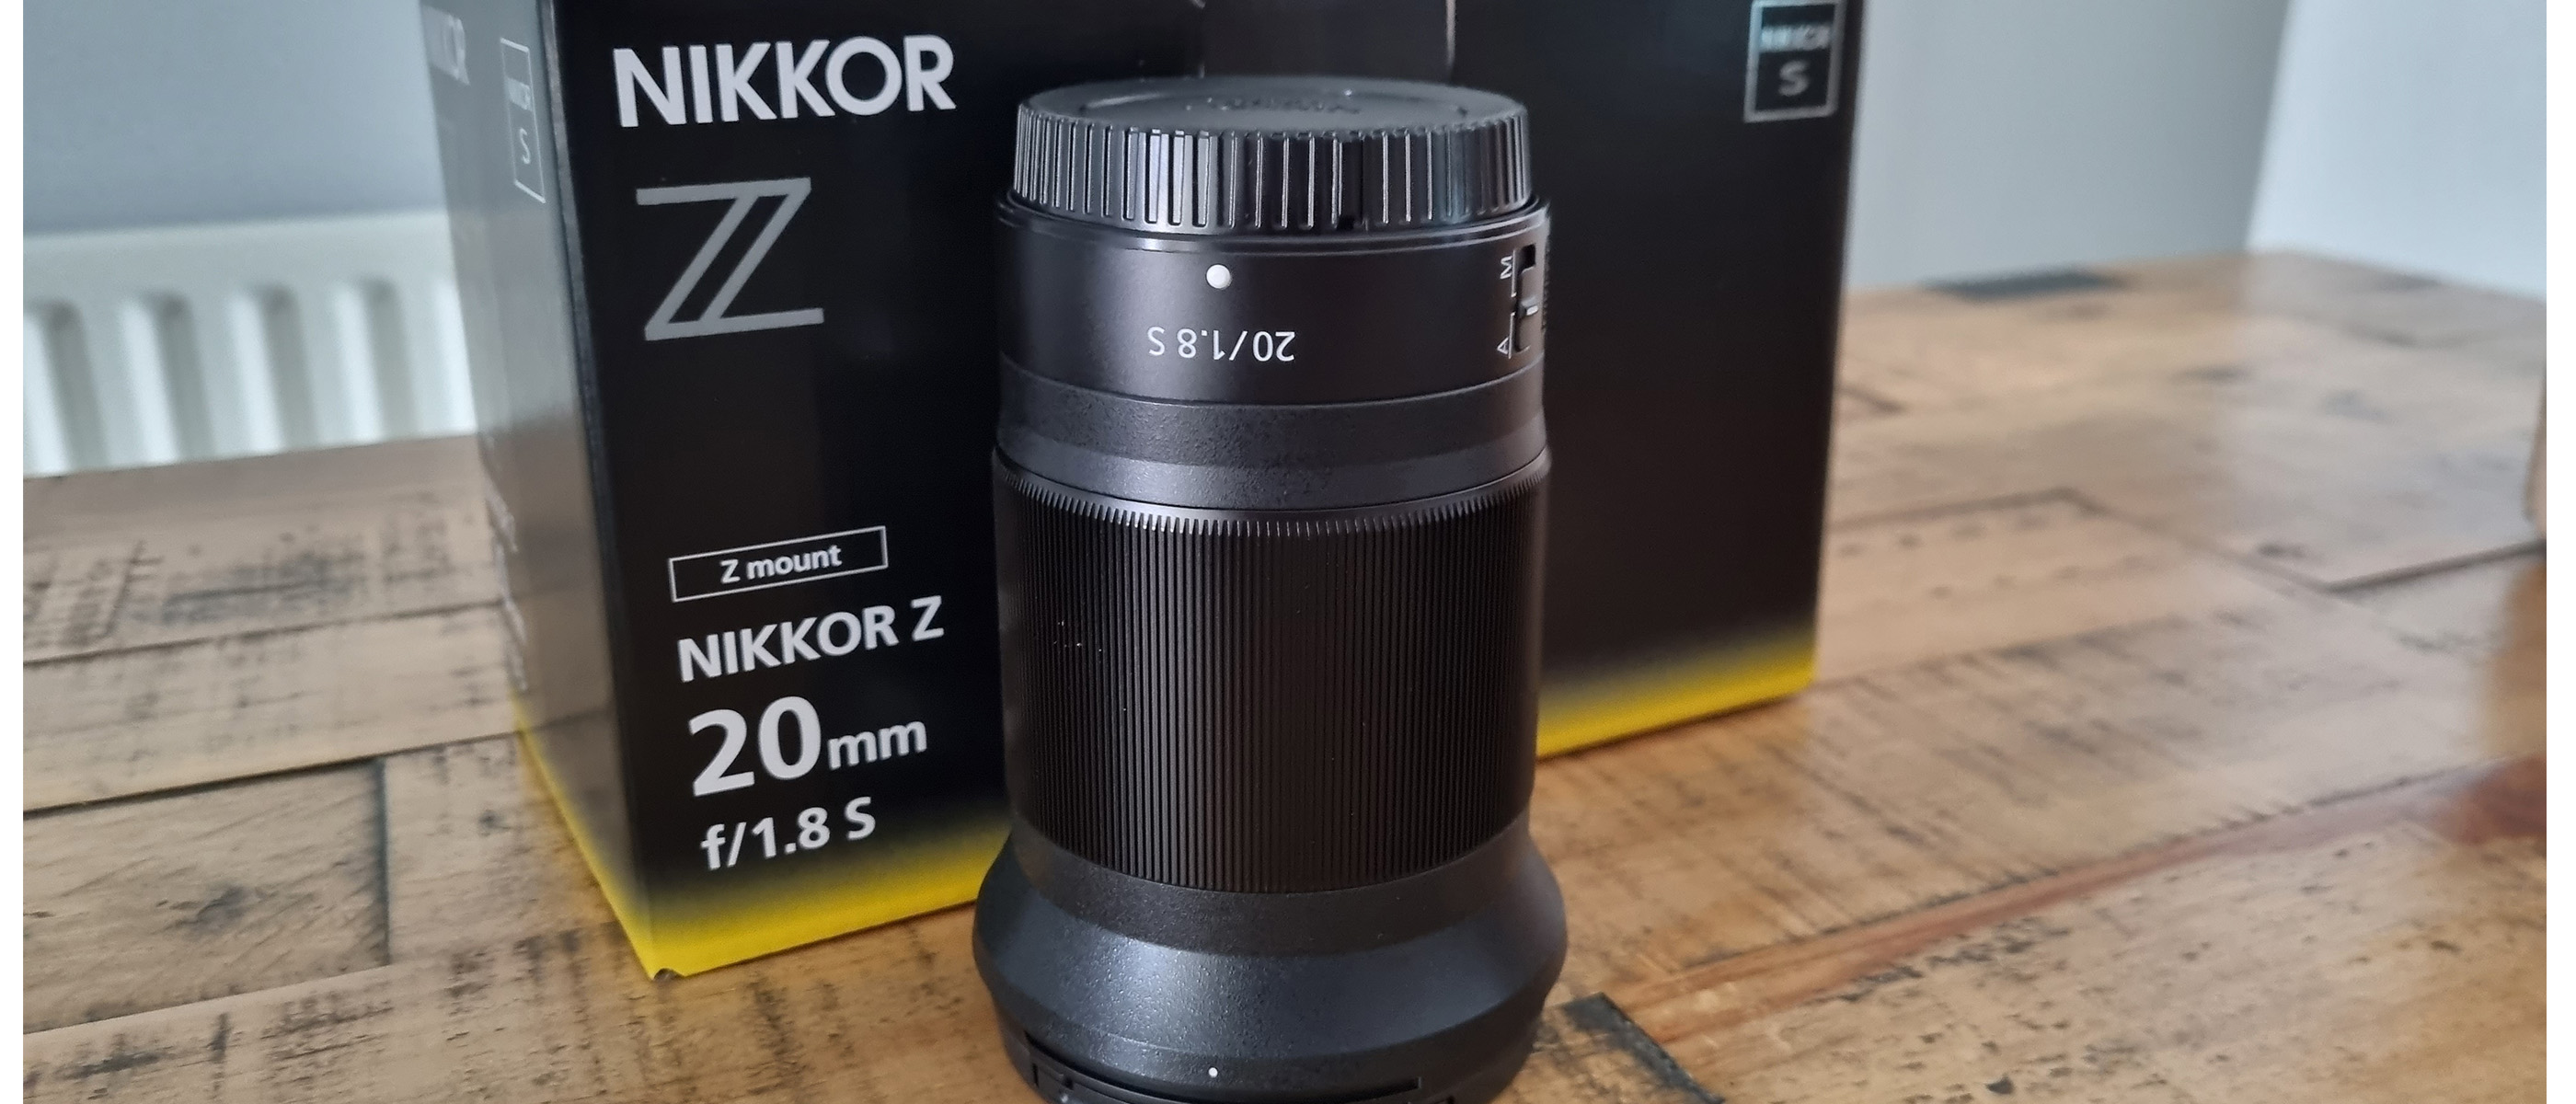 Nikon Z 20mm f/1.8 S wide-angle prime lens review | Space